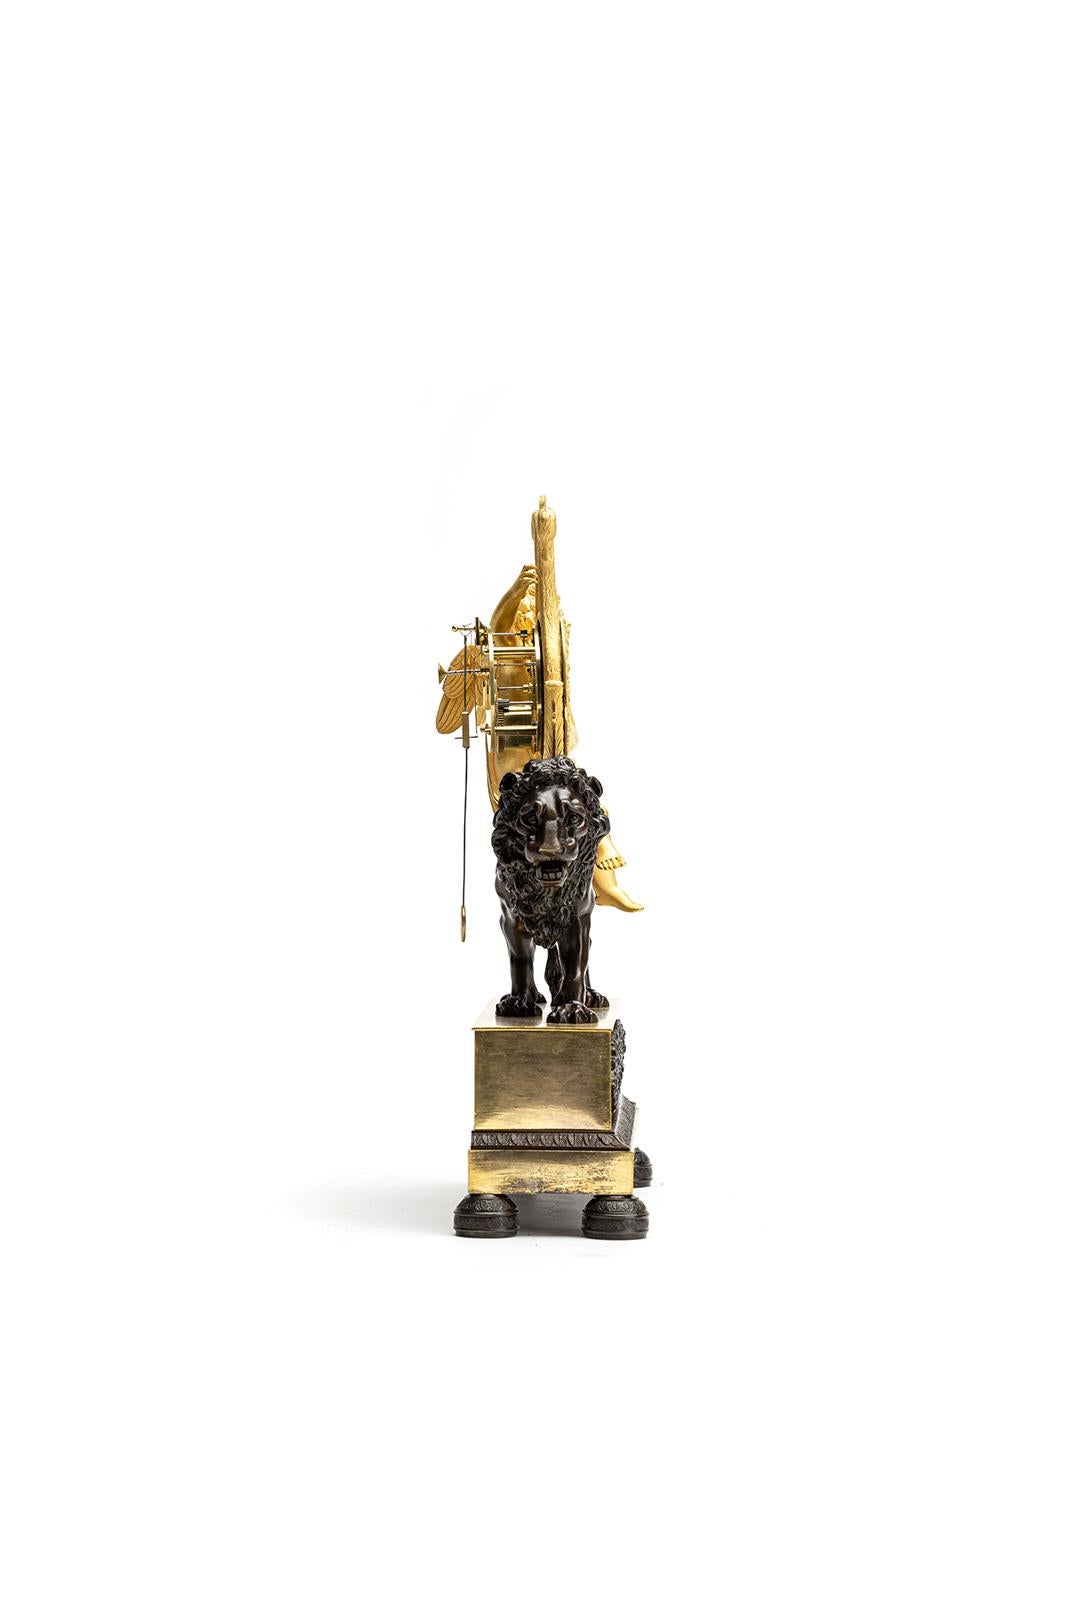 This is a beautiful French Empire/Charles X mantelpiece/pendulum from circa 1820 that is both unusual and charming. It features a lovely depiction of Cupido playing the harp on the back of a realistic-looking lion, creating a striking contrast with